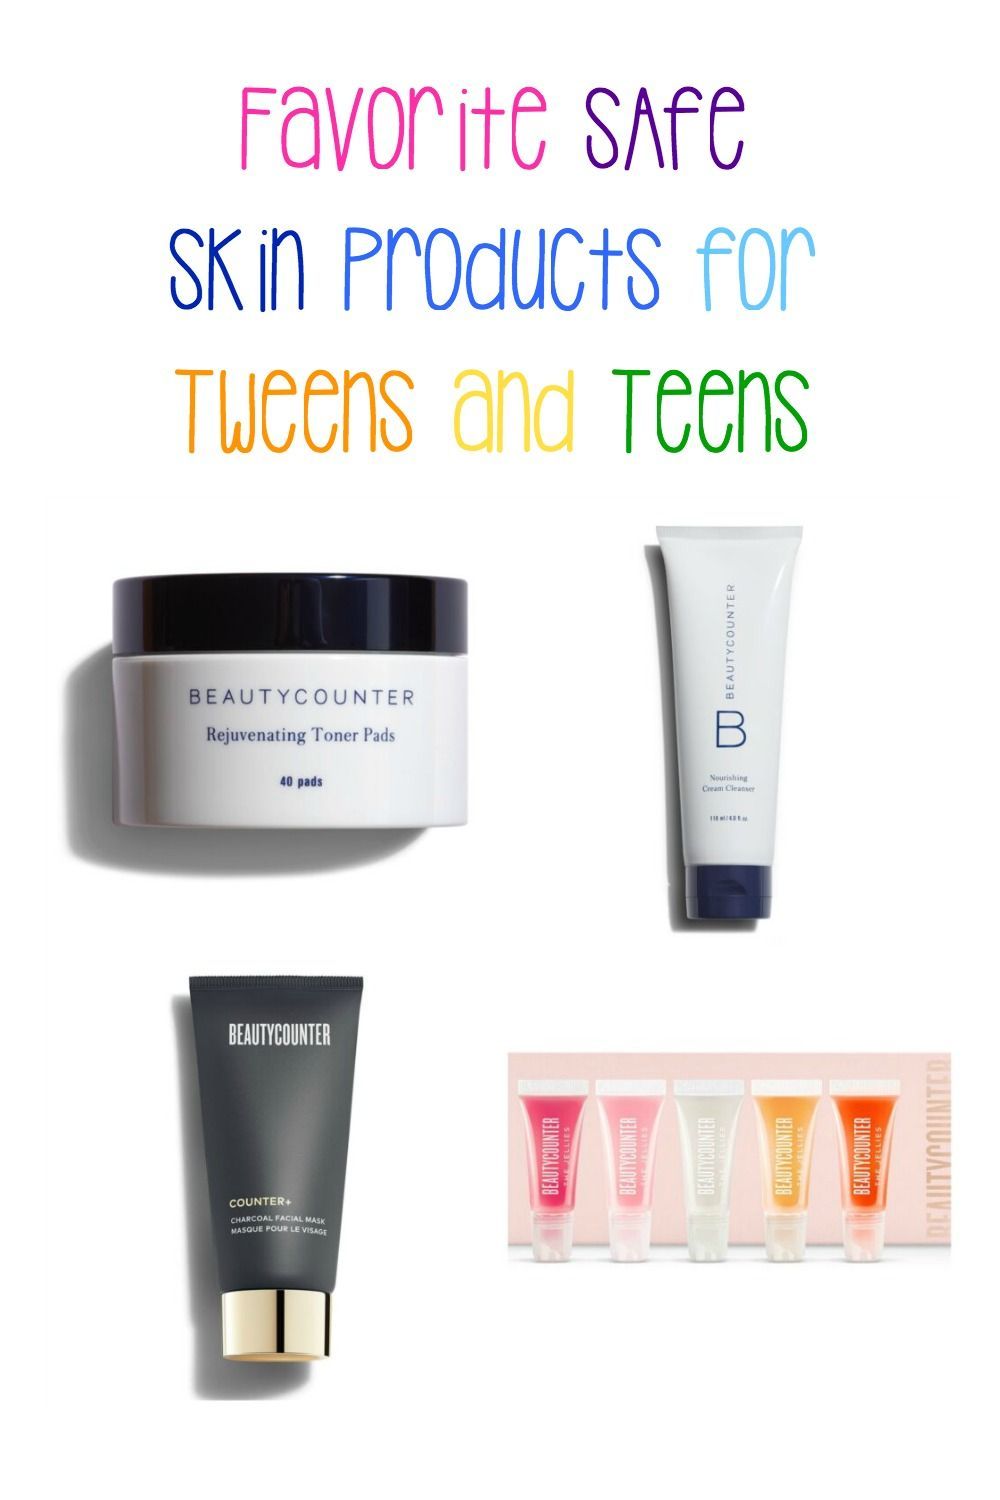 Favorite Safe Skin Products for Tweens and Teens - Favorite Safe Skin Products for Tweens and Teens -   17 beauty Makeup teens ideas